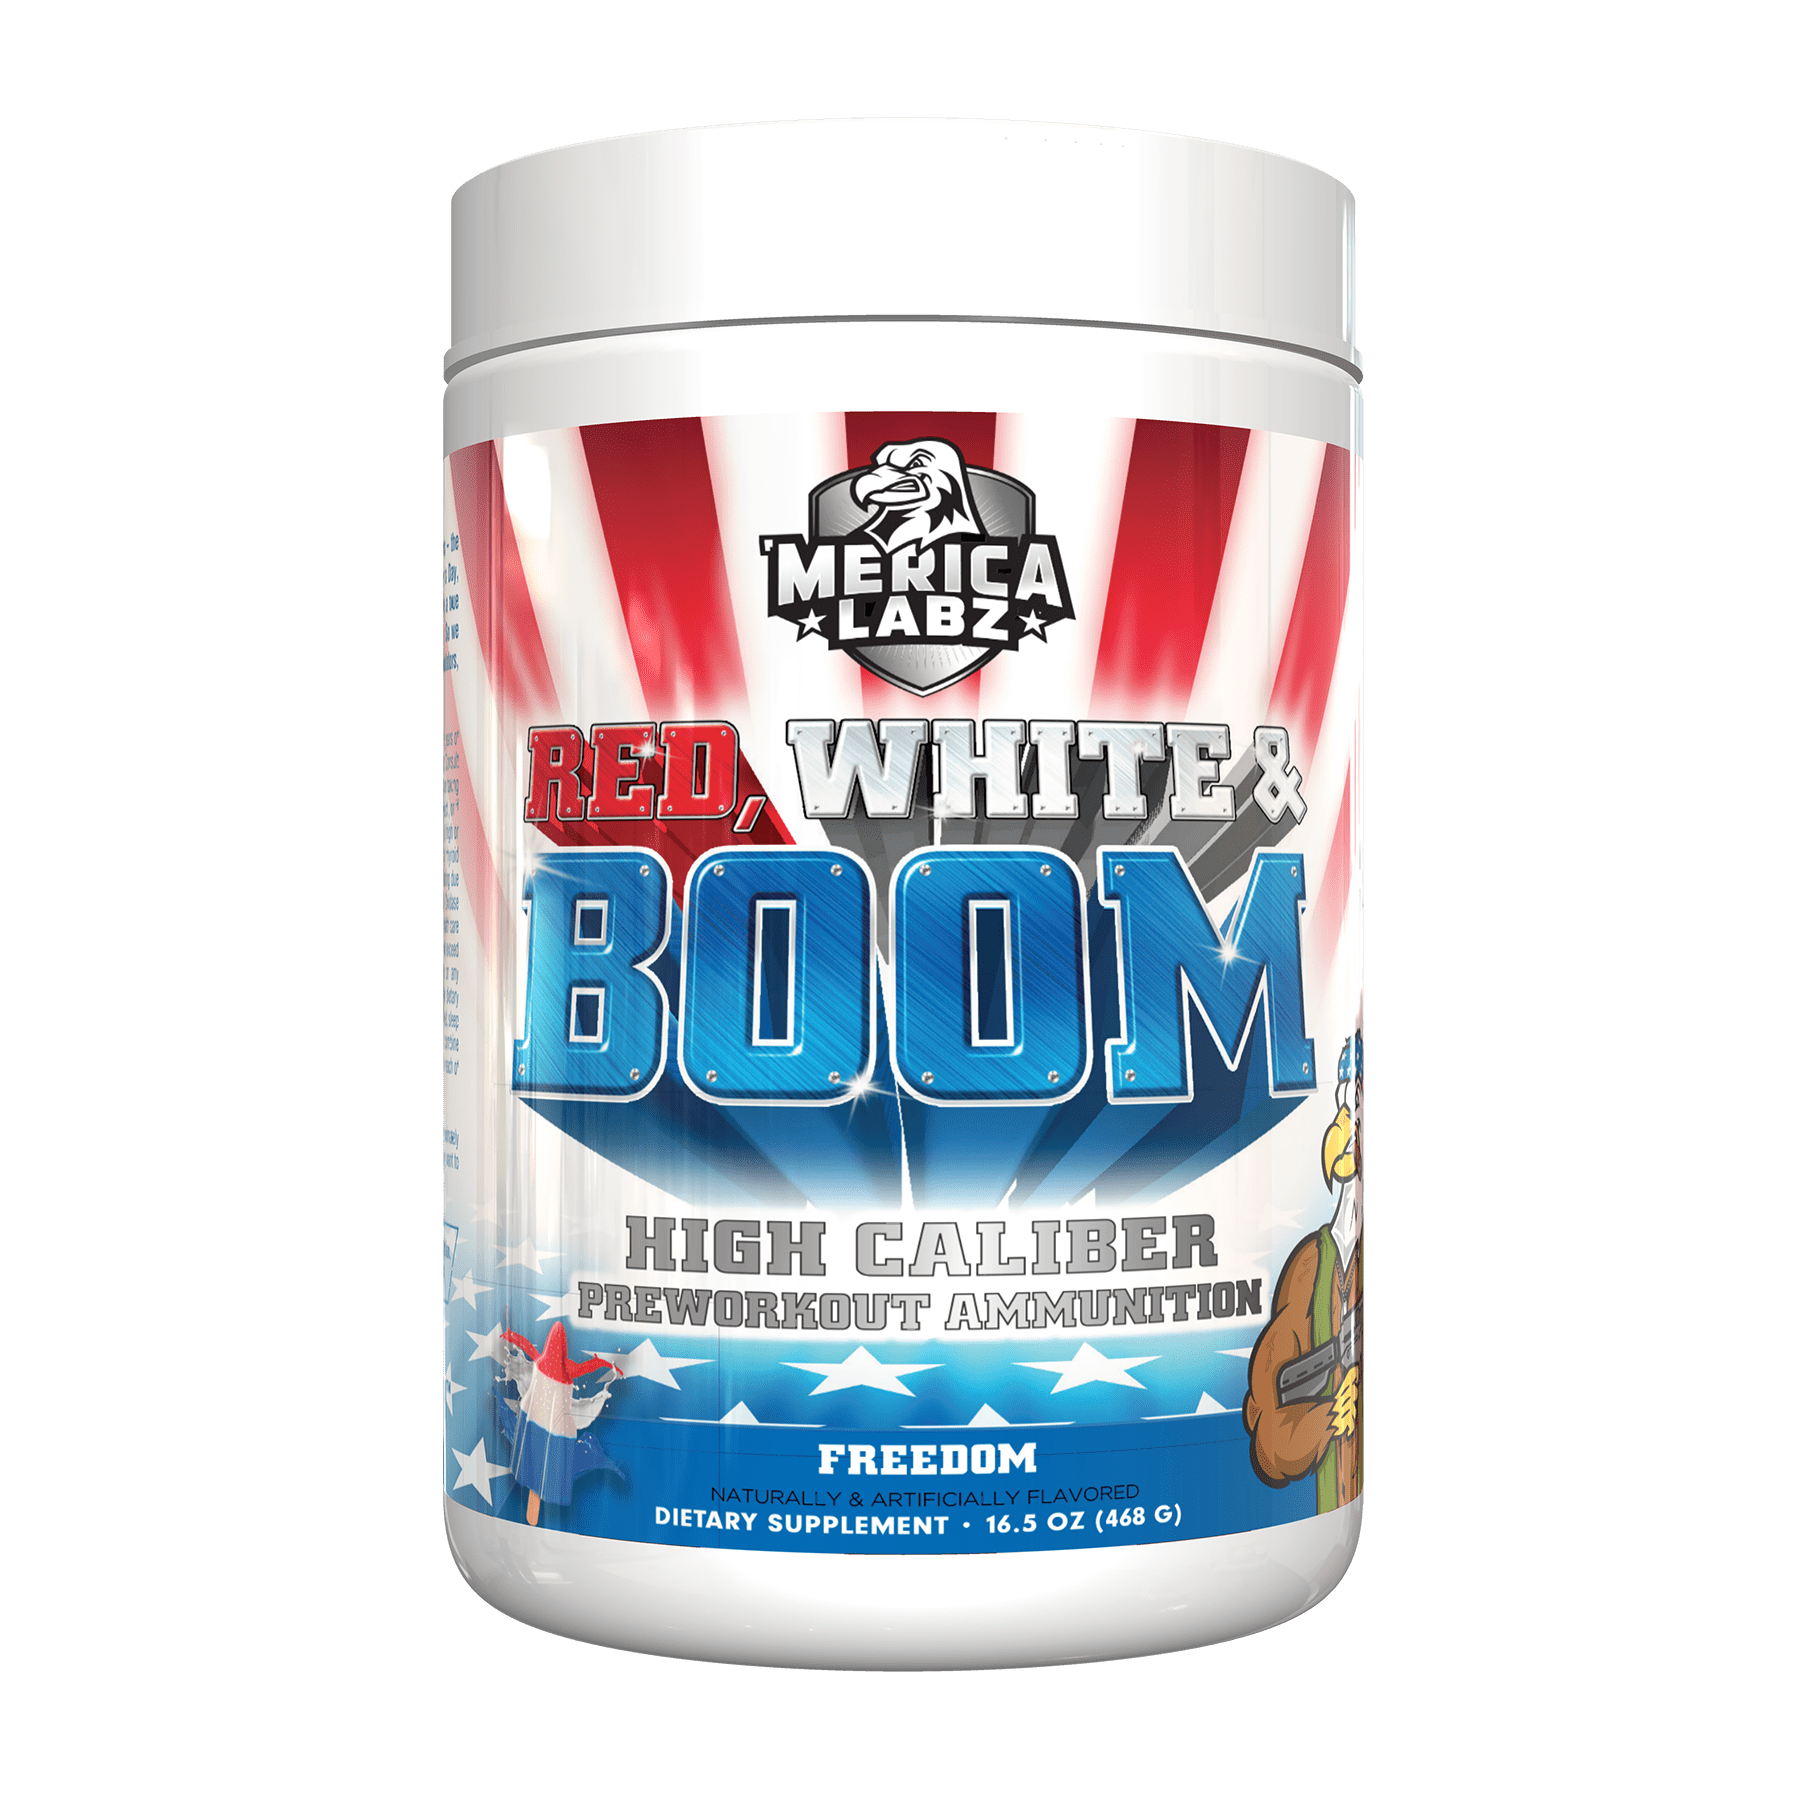 5 Day Red White And Boom Pre Workout for Burn Fat fast